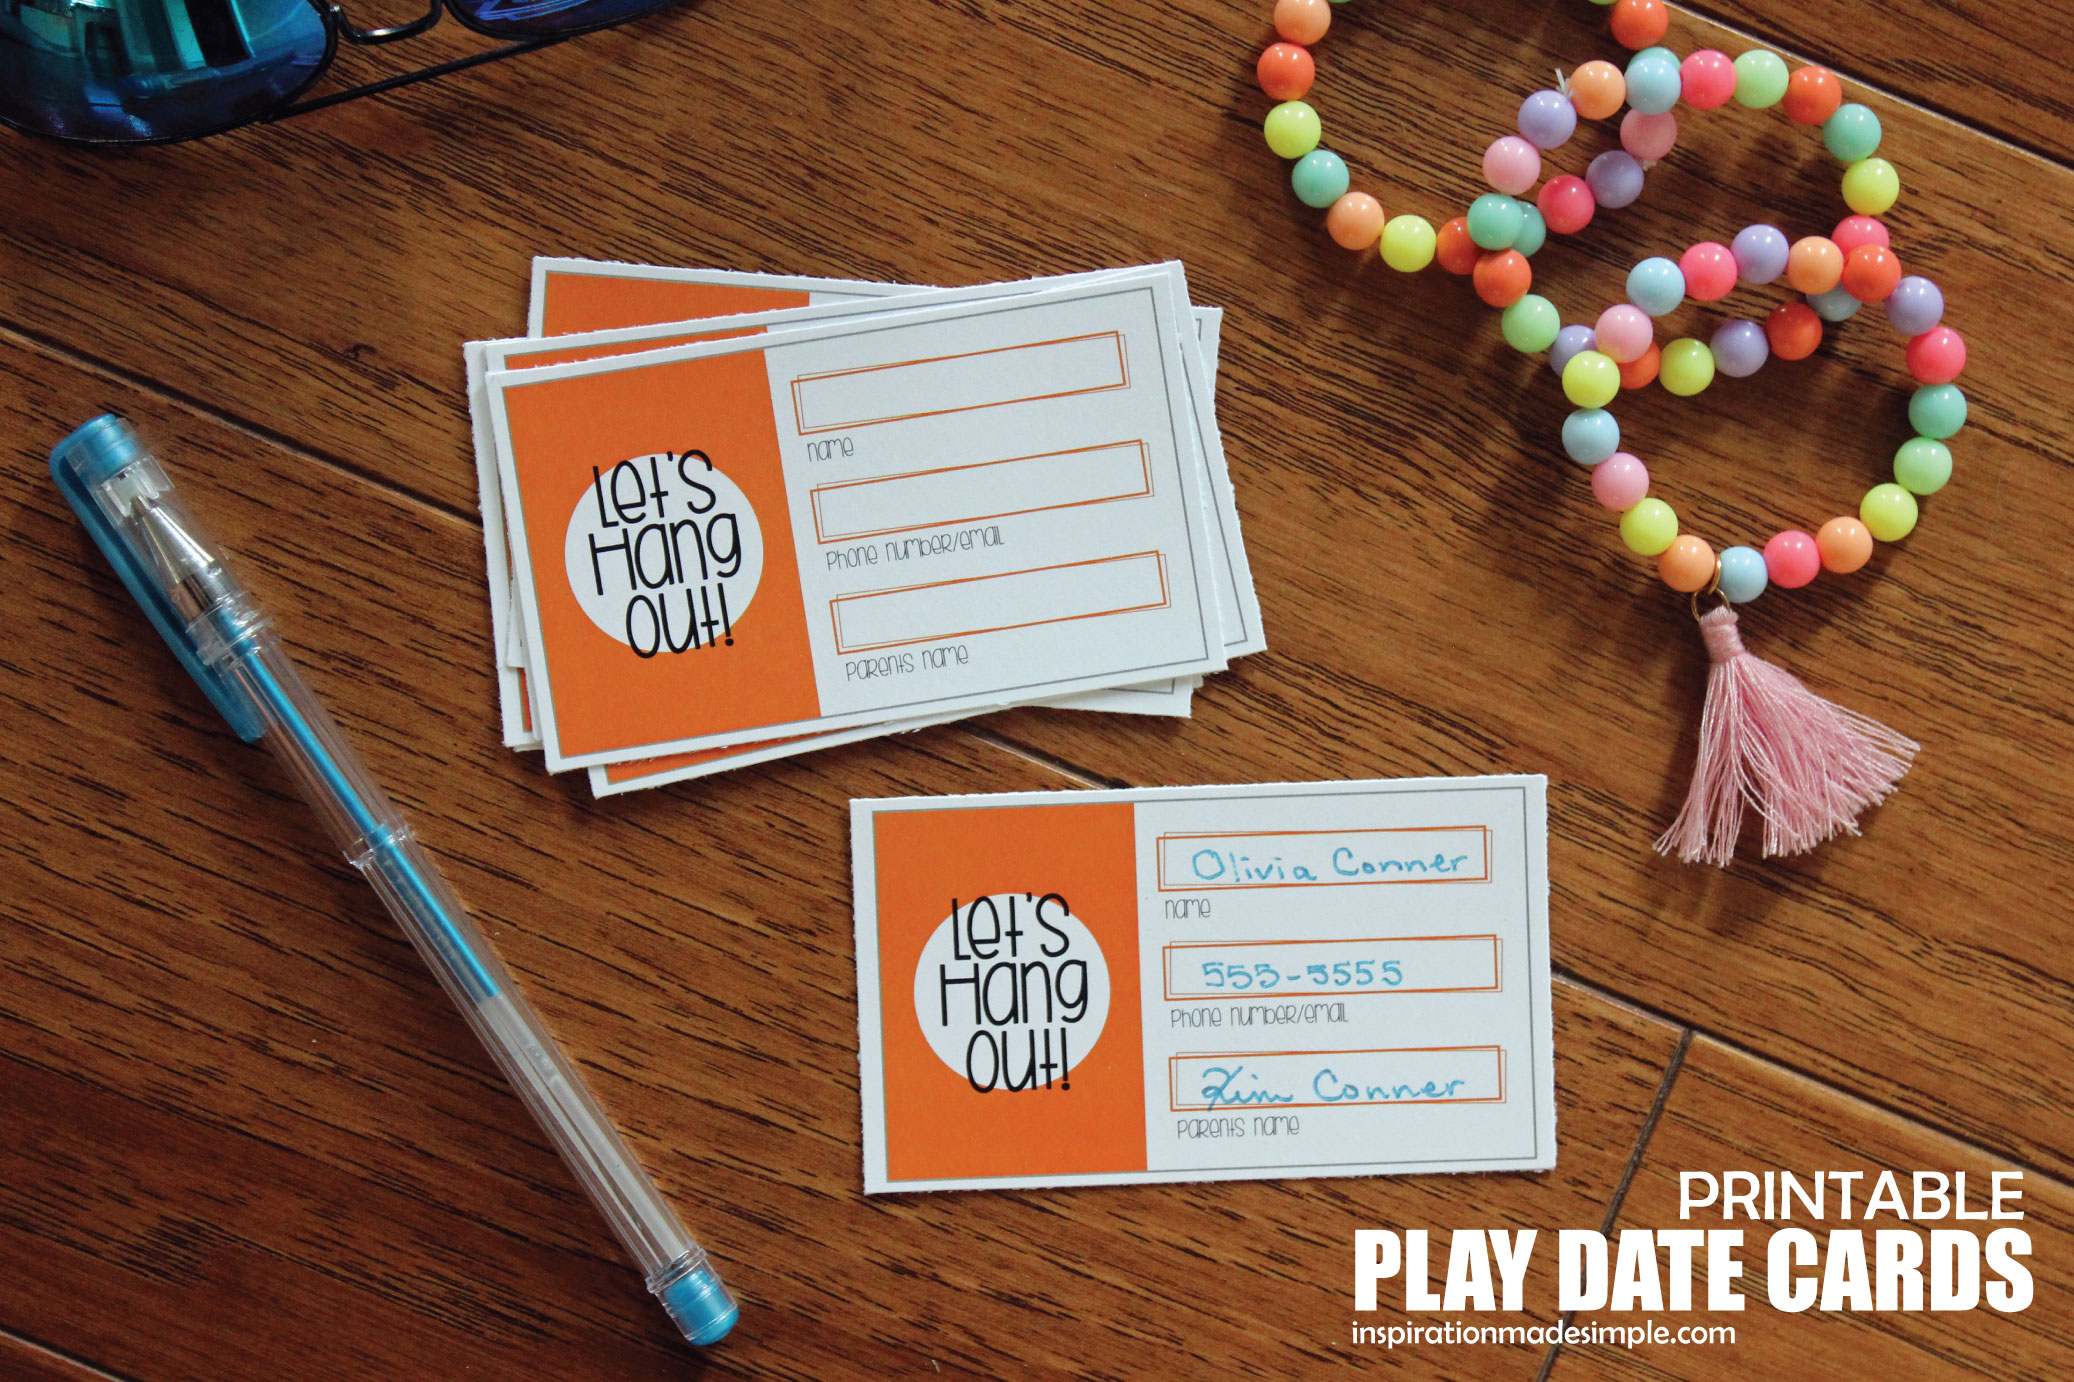 Printable Play Date Cards for Kids